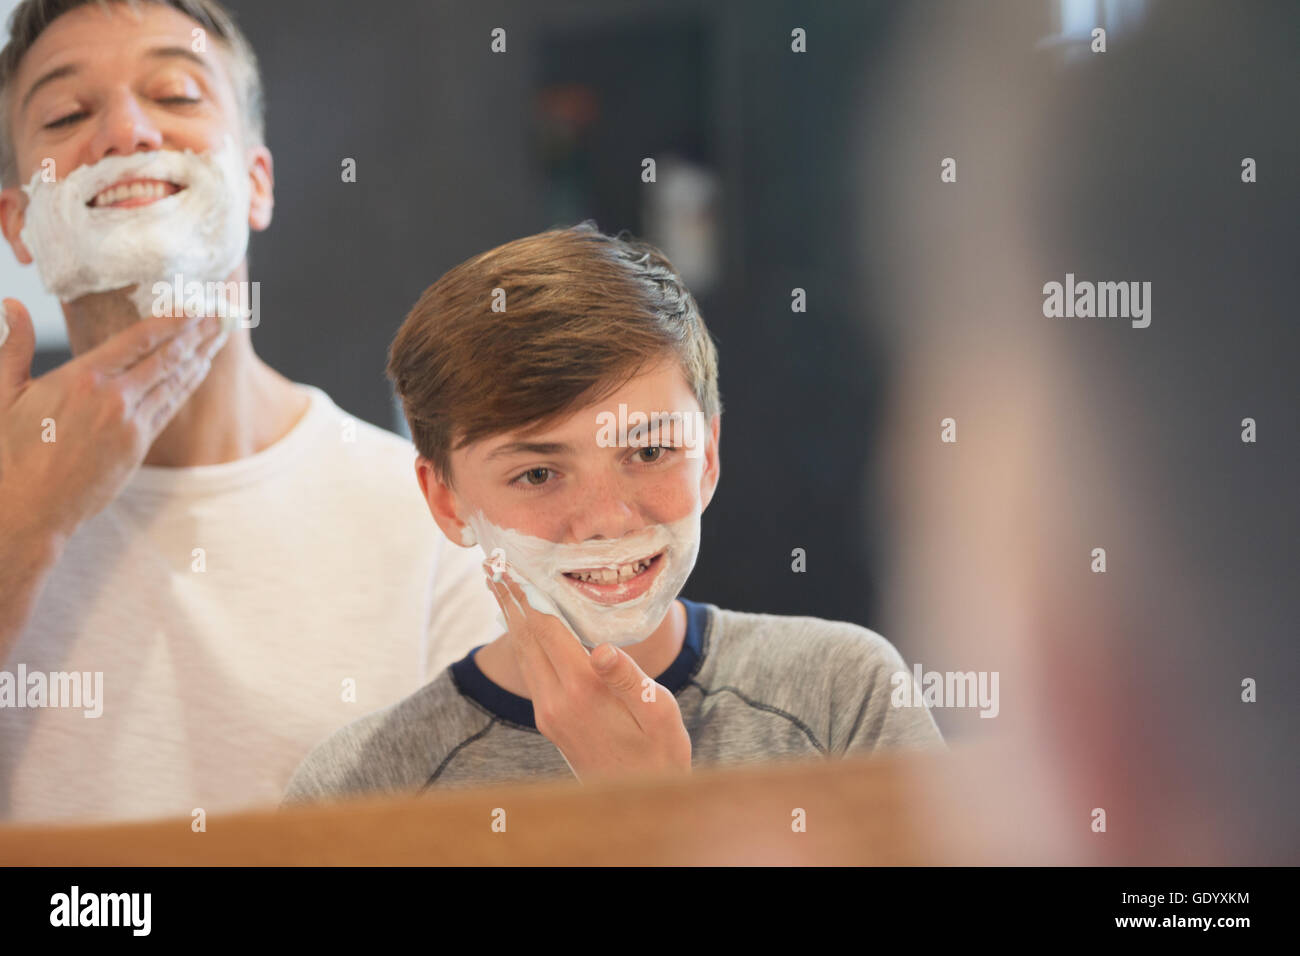 Father watching son pretending to shave face in bathroom mirror Stock Photo